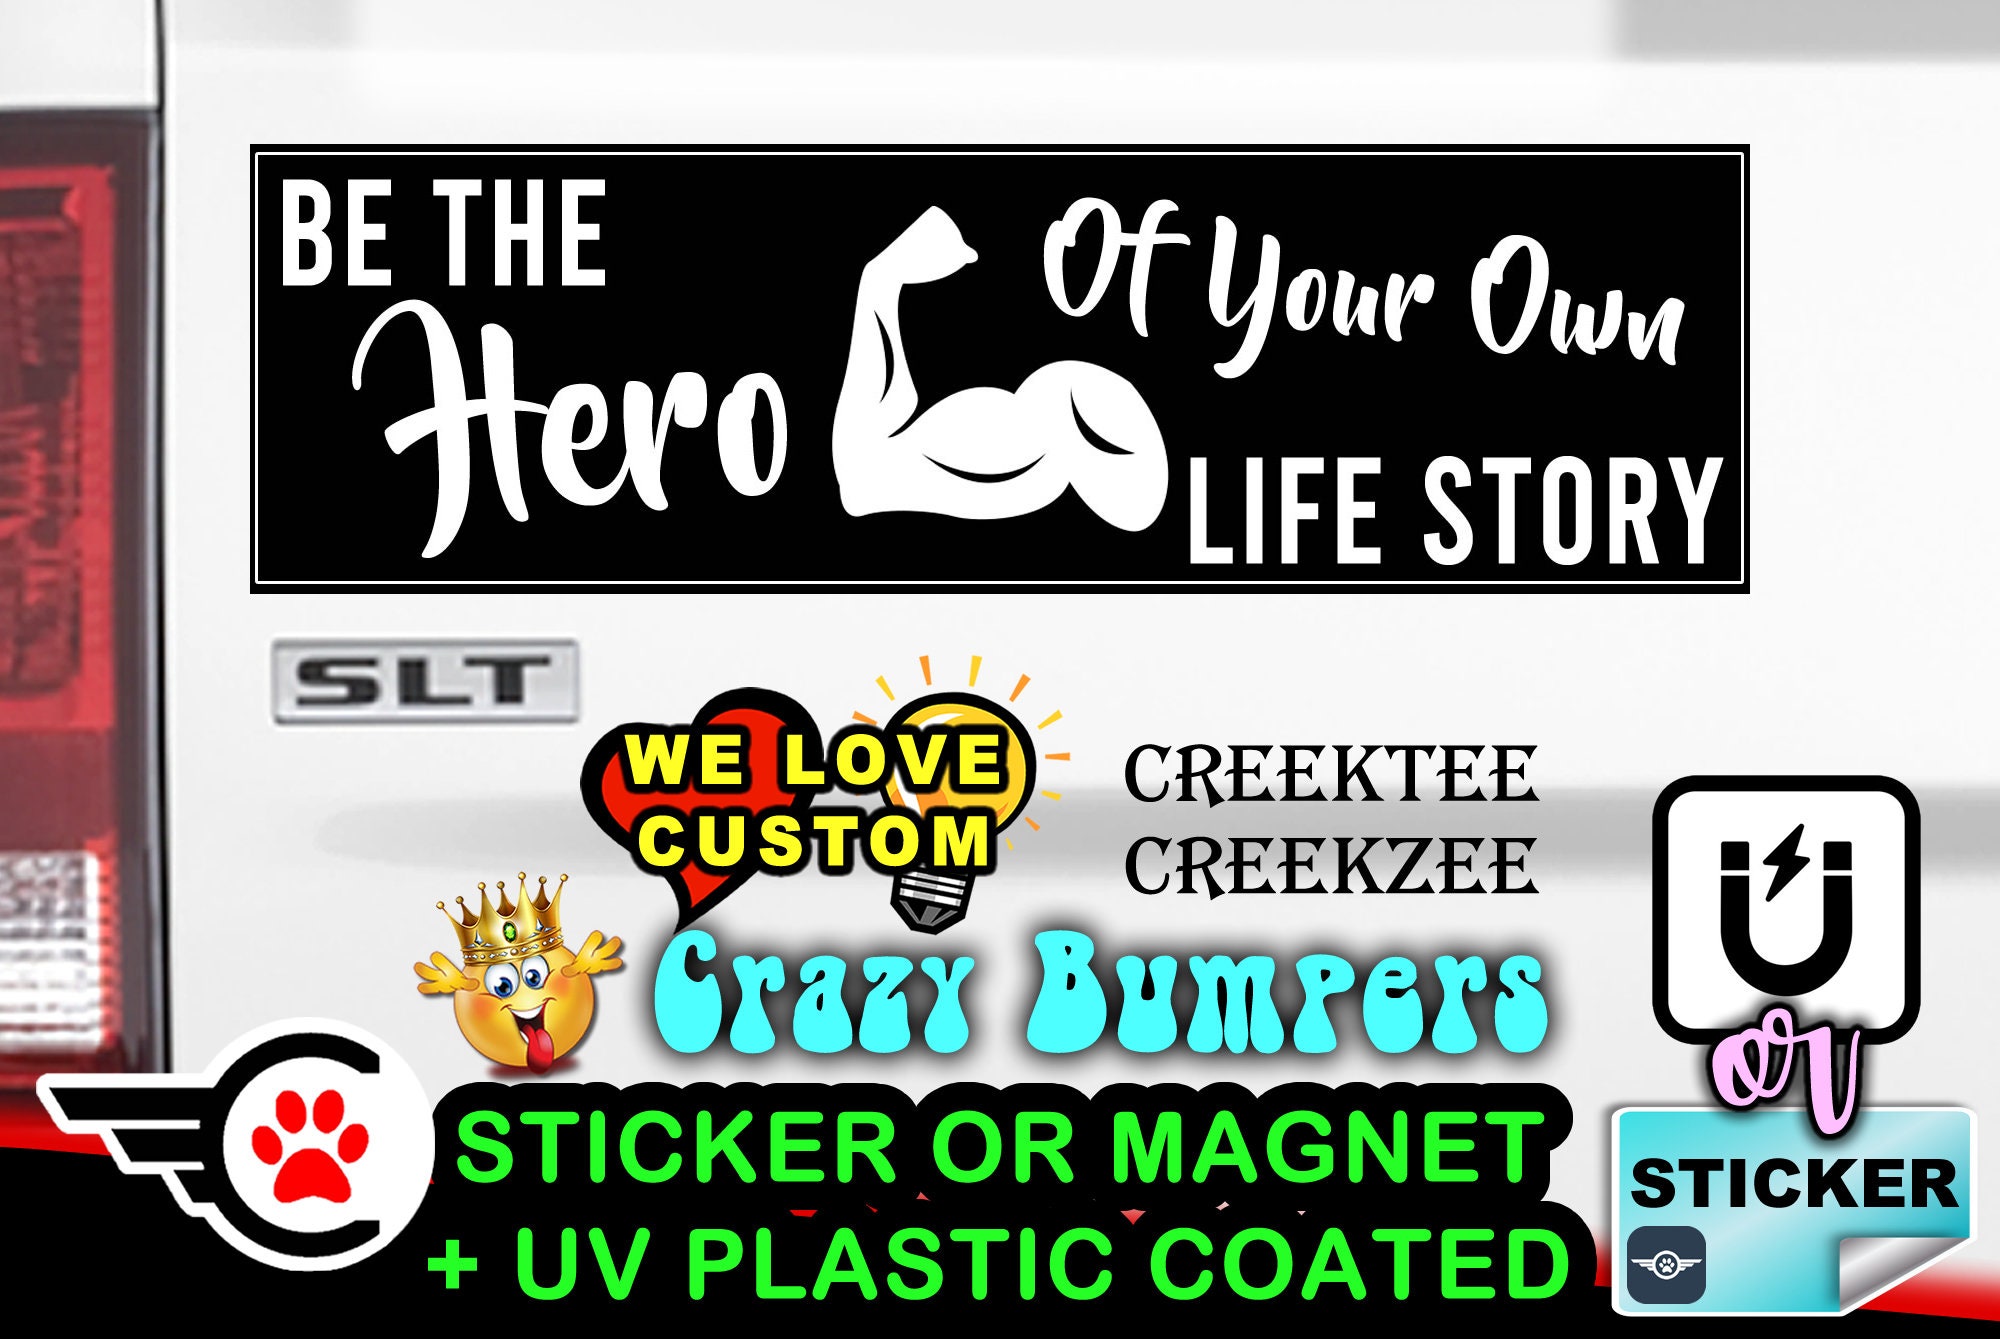 Be The Hero Of Your Own Life Story - Bumper Sticker or Magnet sizes 4